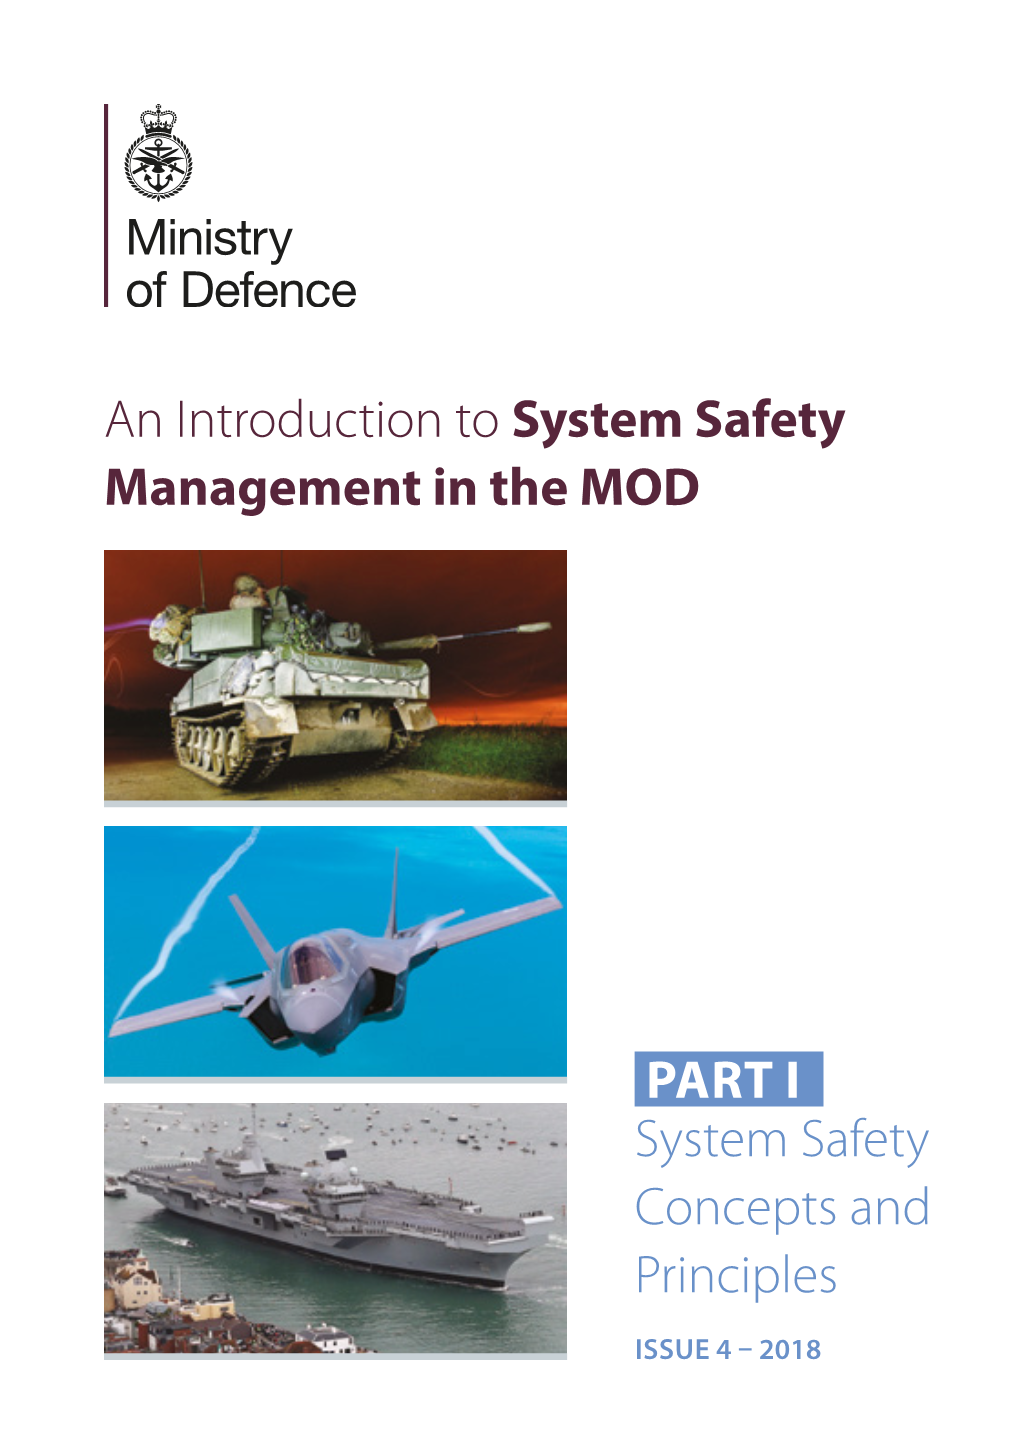 System Safety Management in the MOD